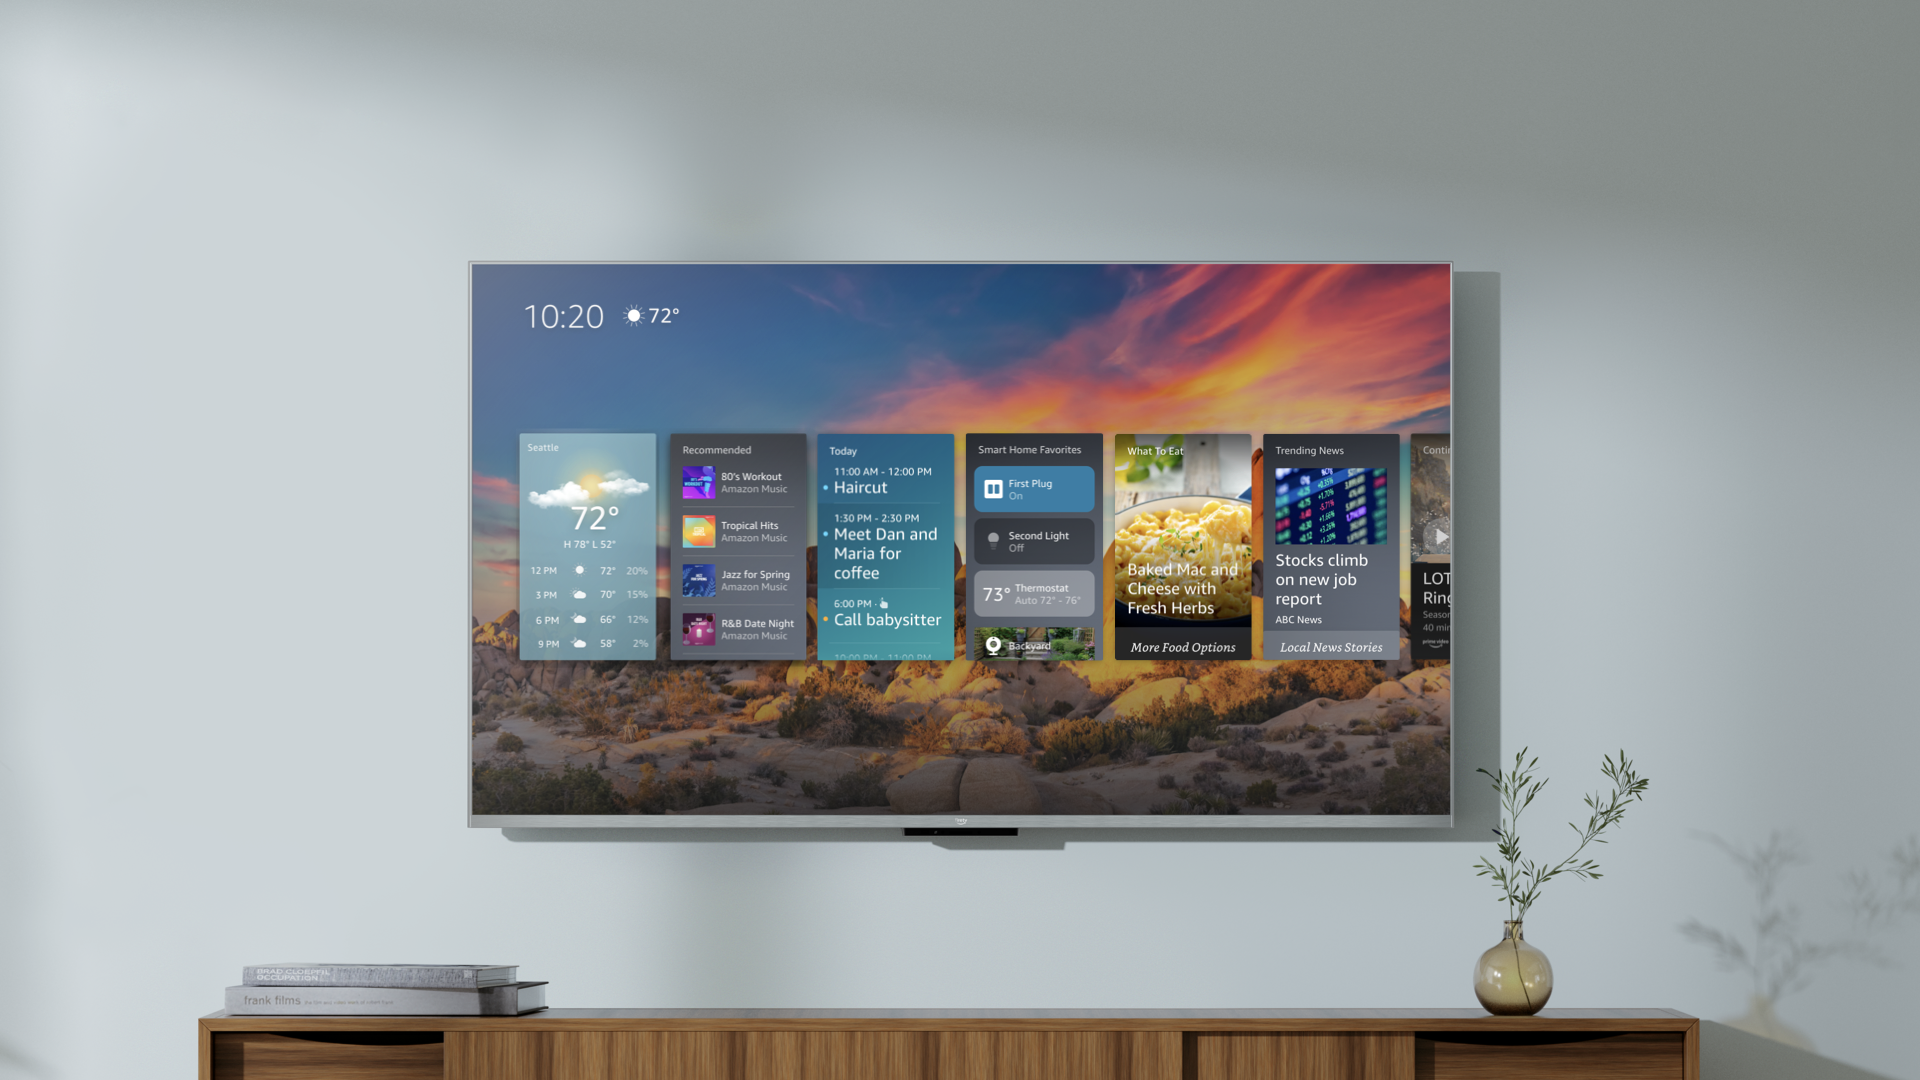 Amazon launches its own QLED 4K TVs, starting at $800 | Ars Technica